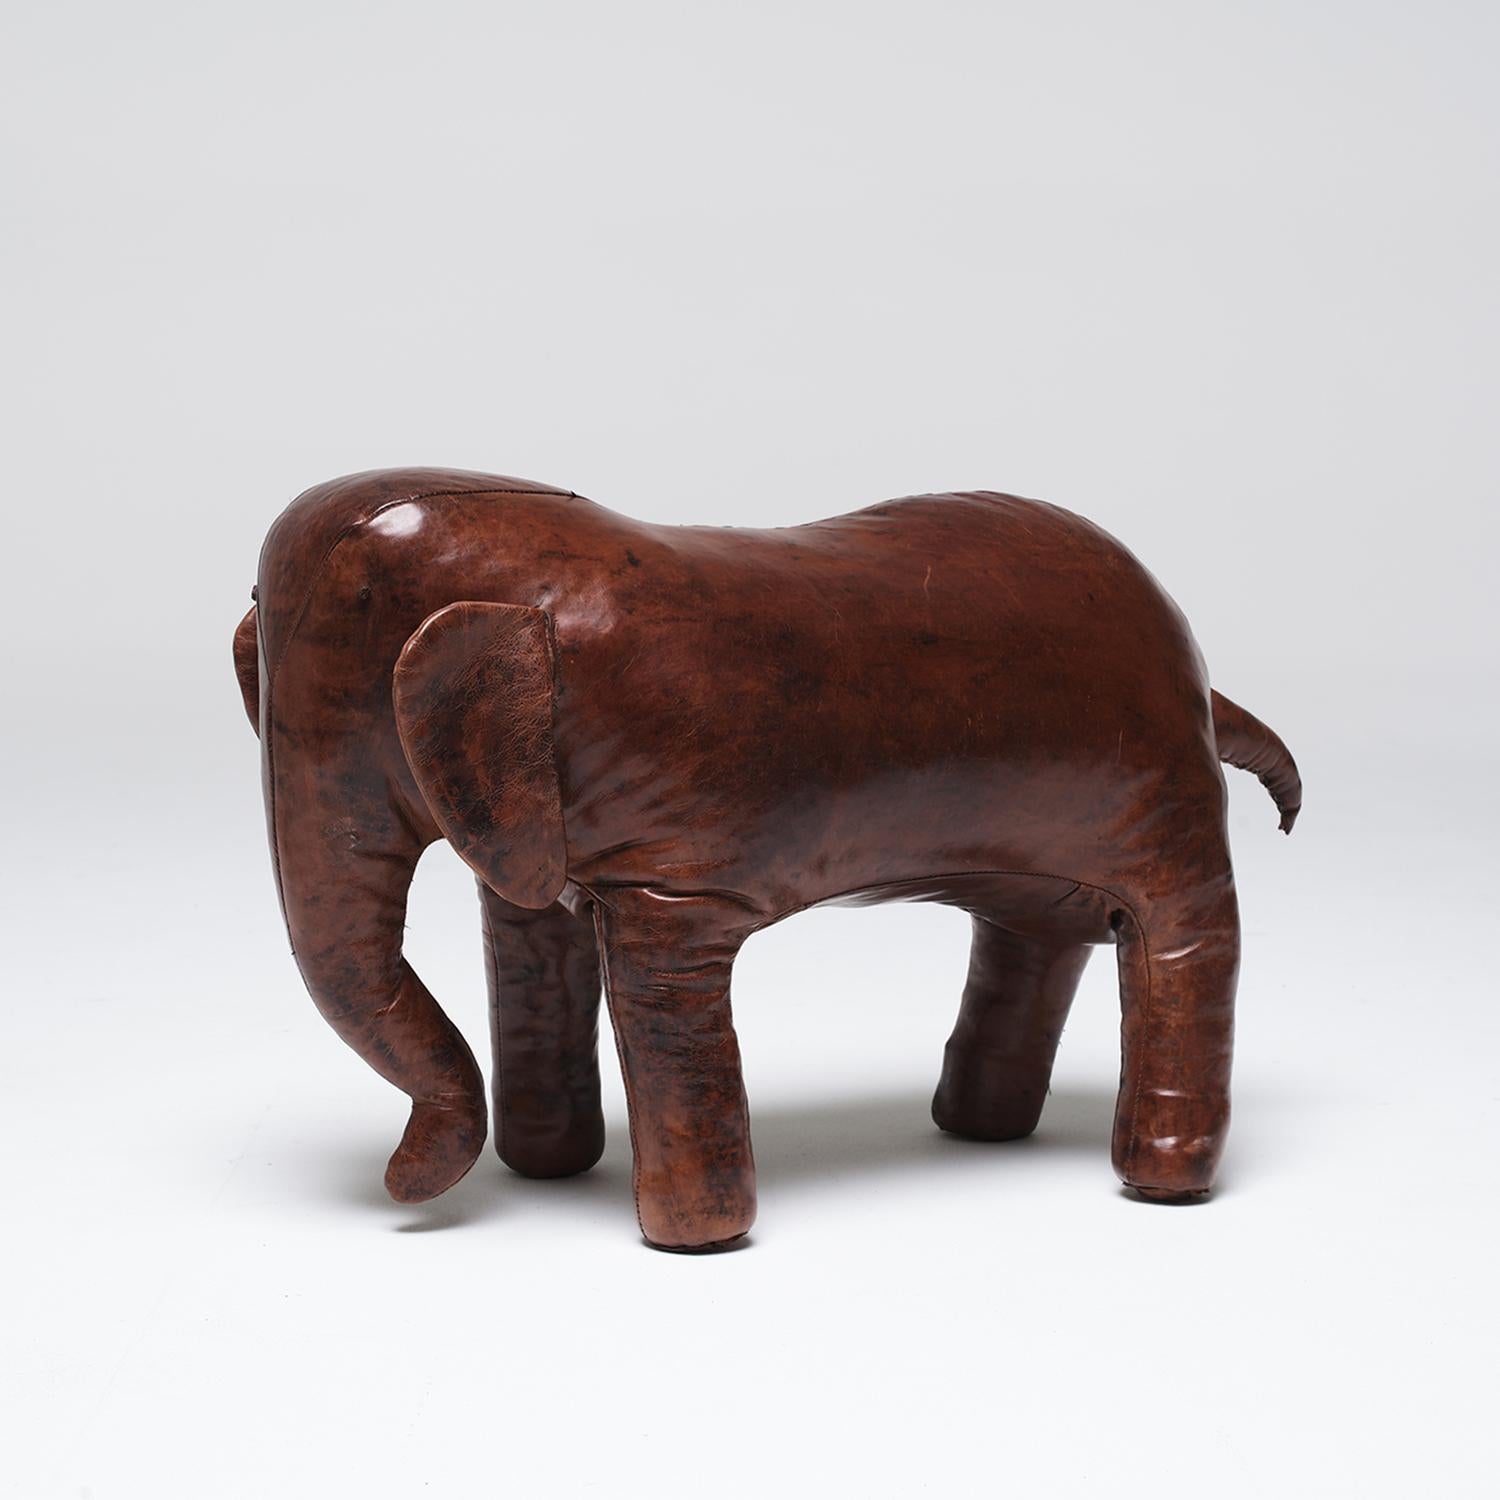 20th Century English Vintage Elephant Footstool in Leather by Dimitri Omersa For Sale 2